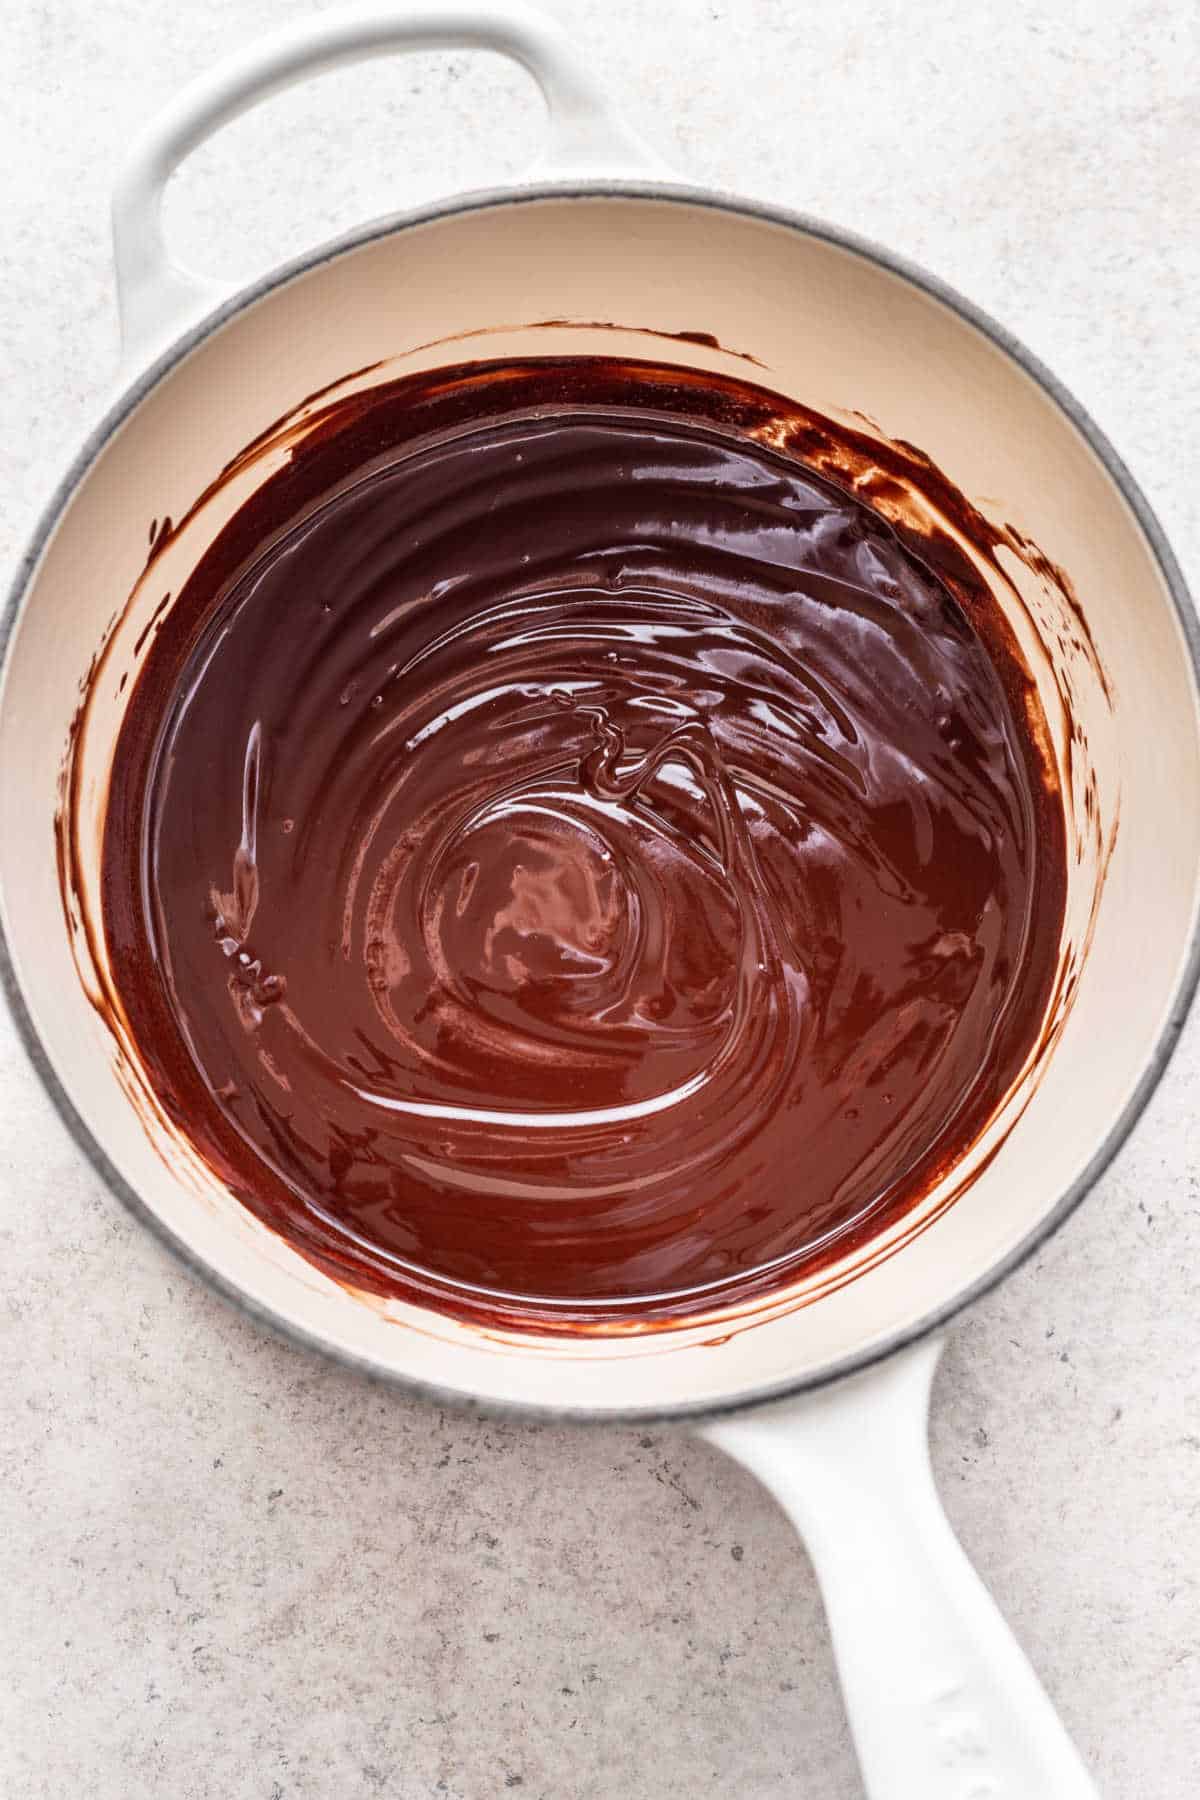 Melted butter and chocolate in a saucepan.